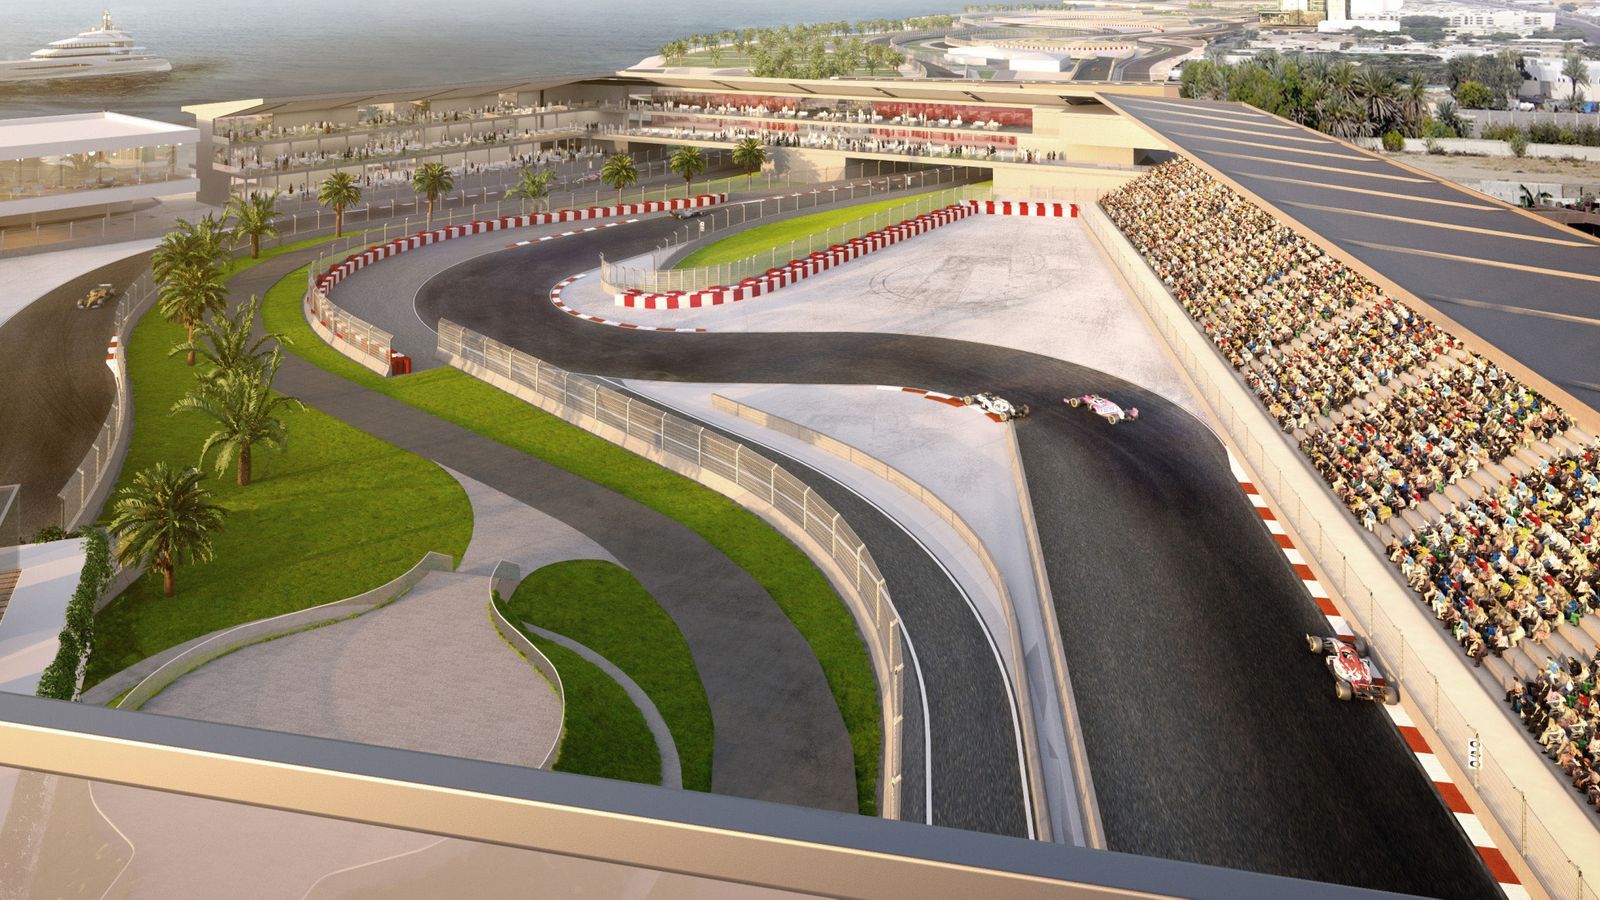 Saudi Arabian GP: F1 reveal 'fastest street track' layout for country's debut in 2021 season. Local News New York USA